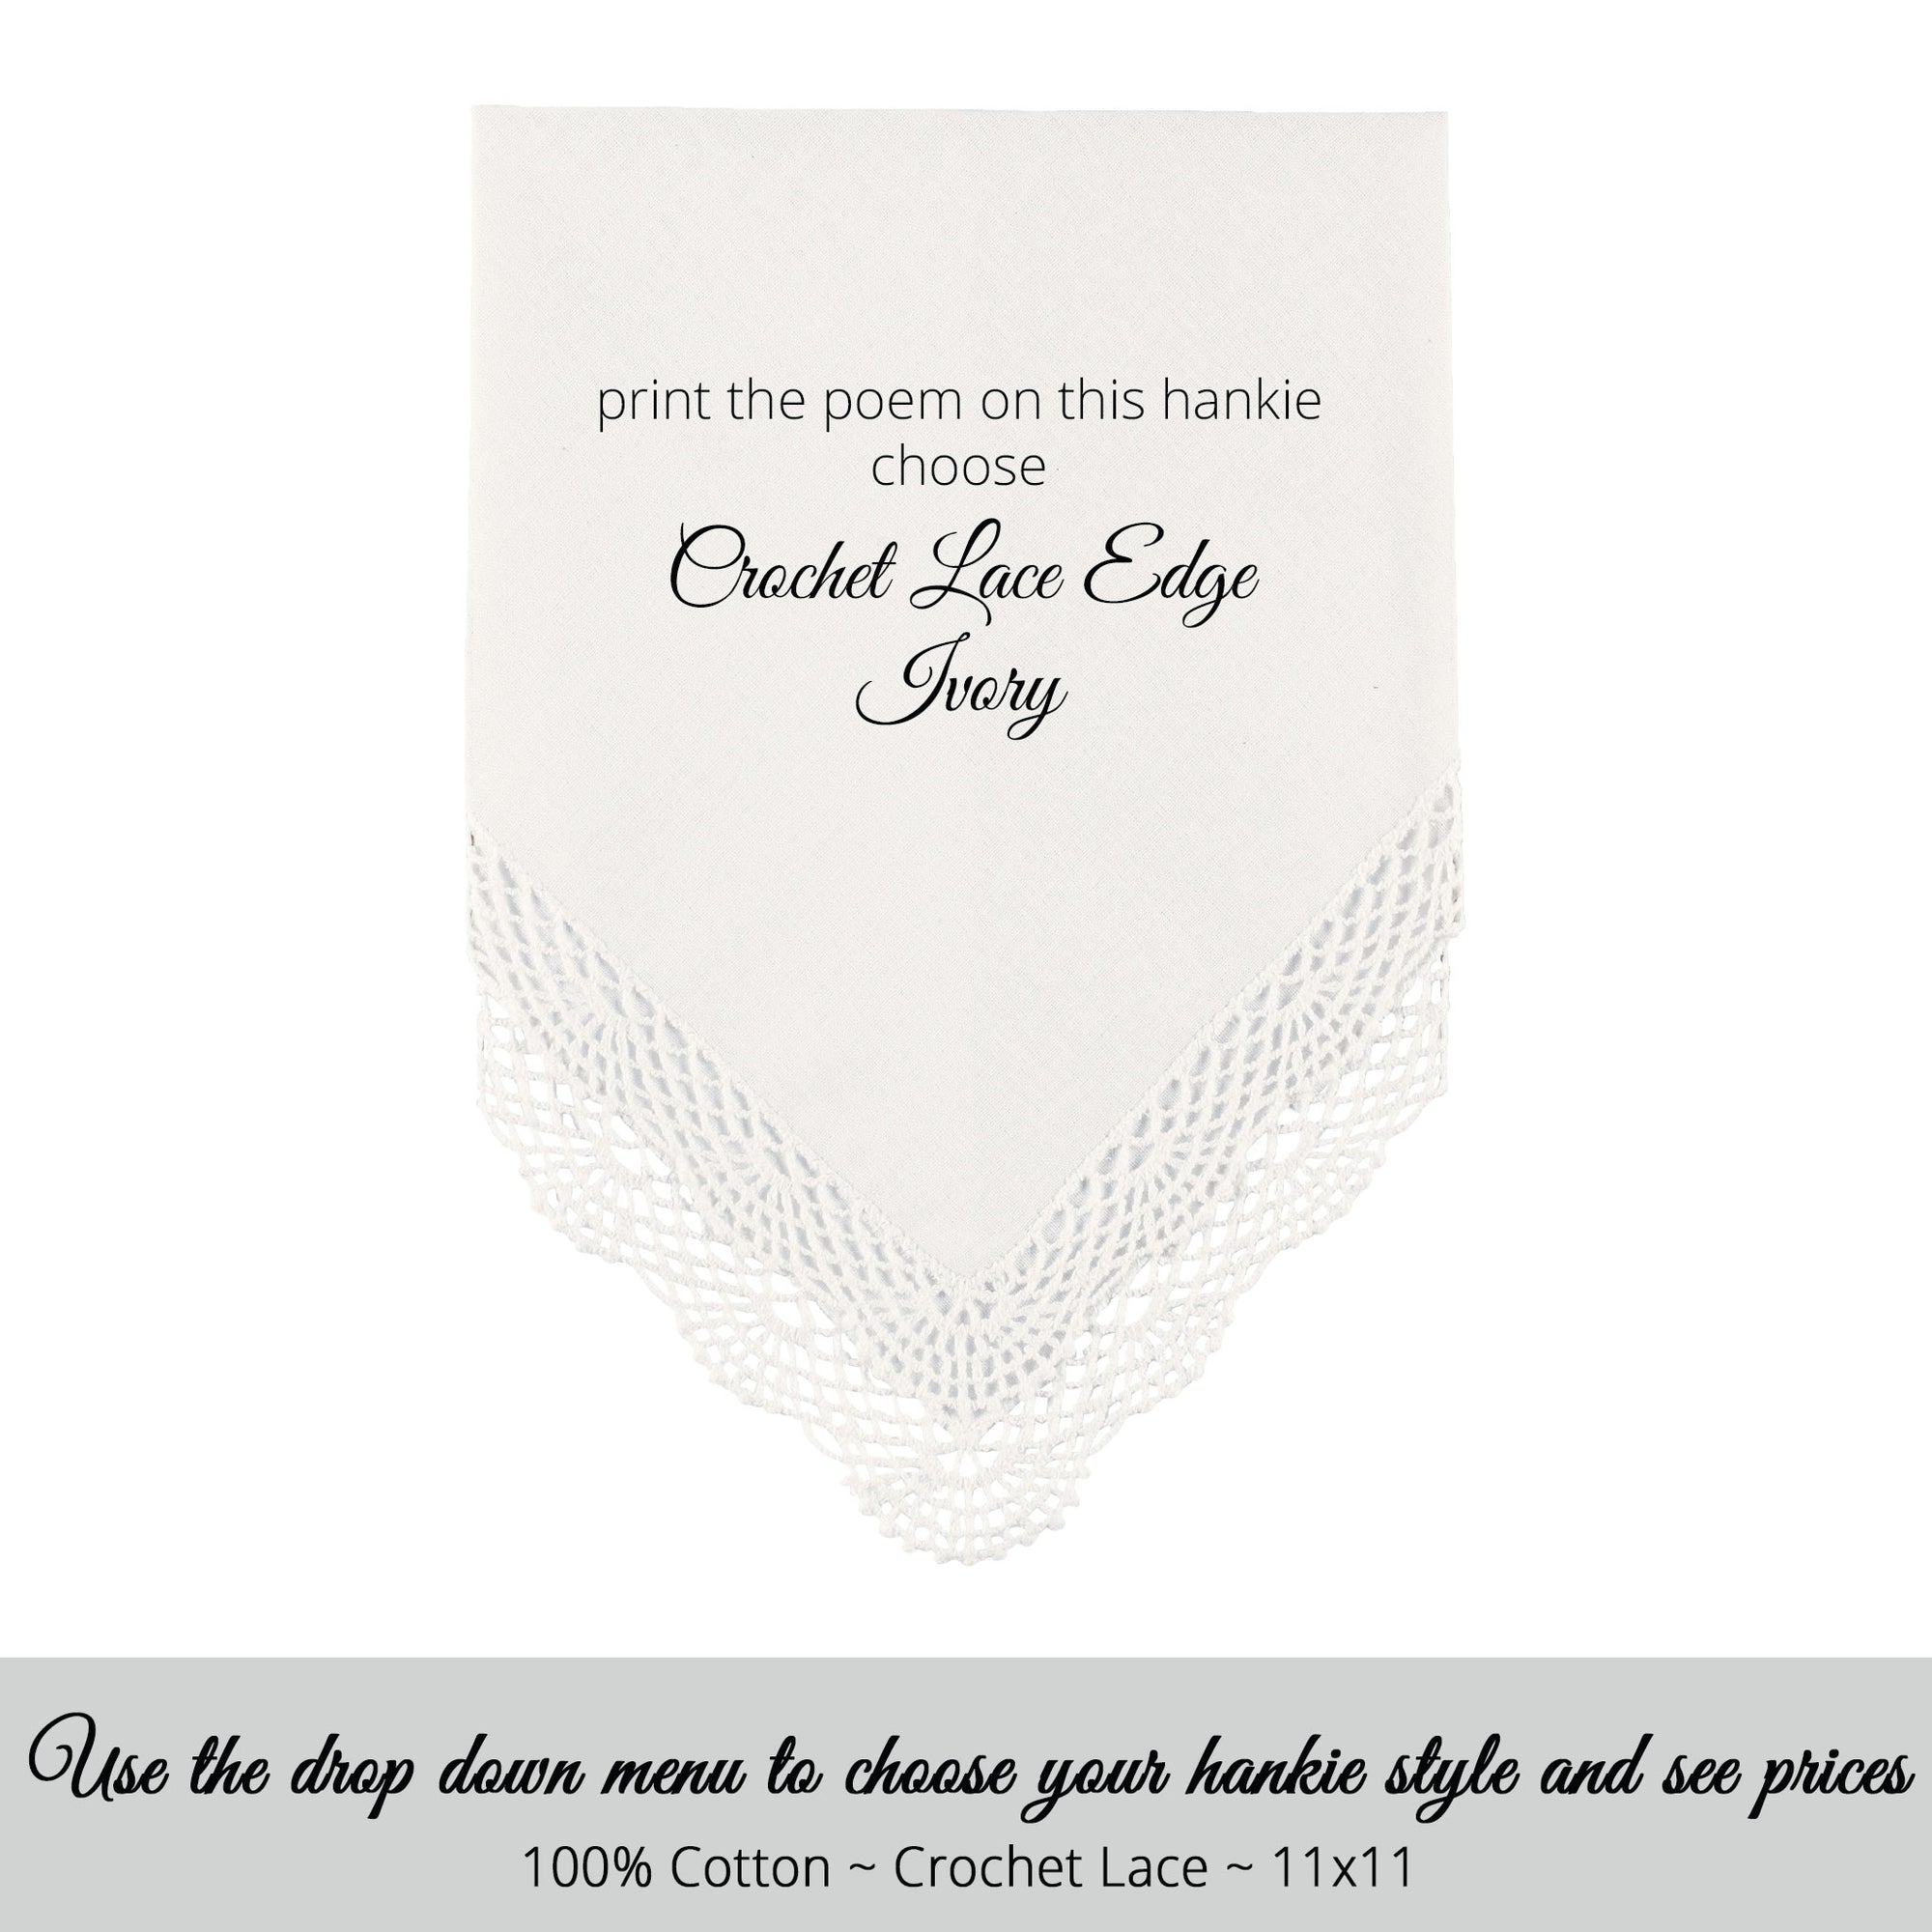 Wedding handkerchief ivory with crochet lace edge for the sister in law of the bride poem printed hankie